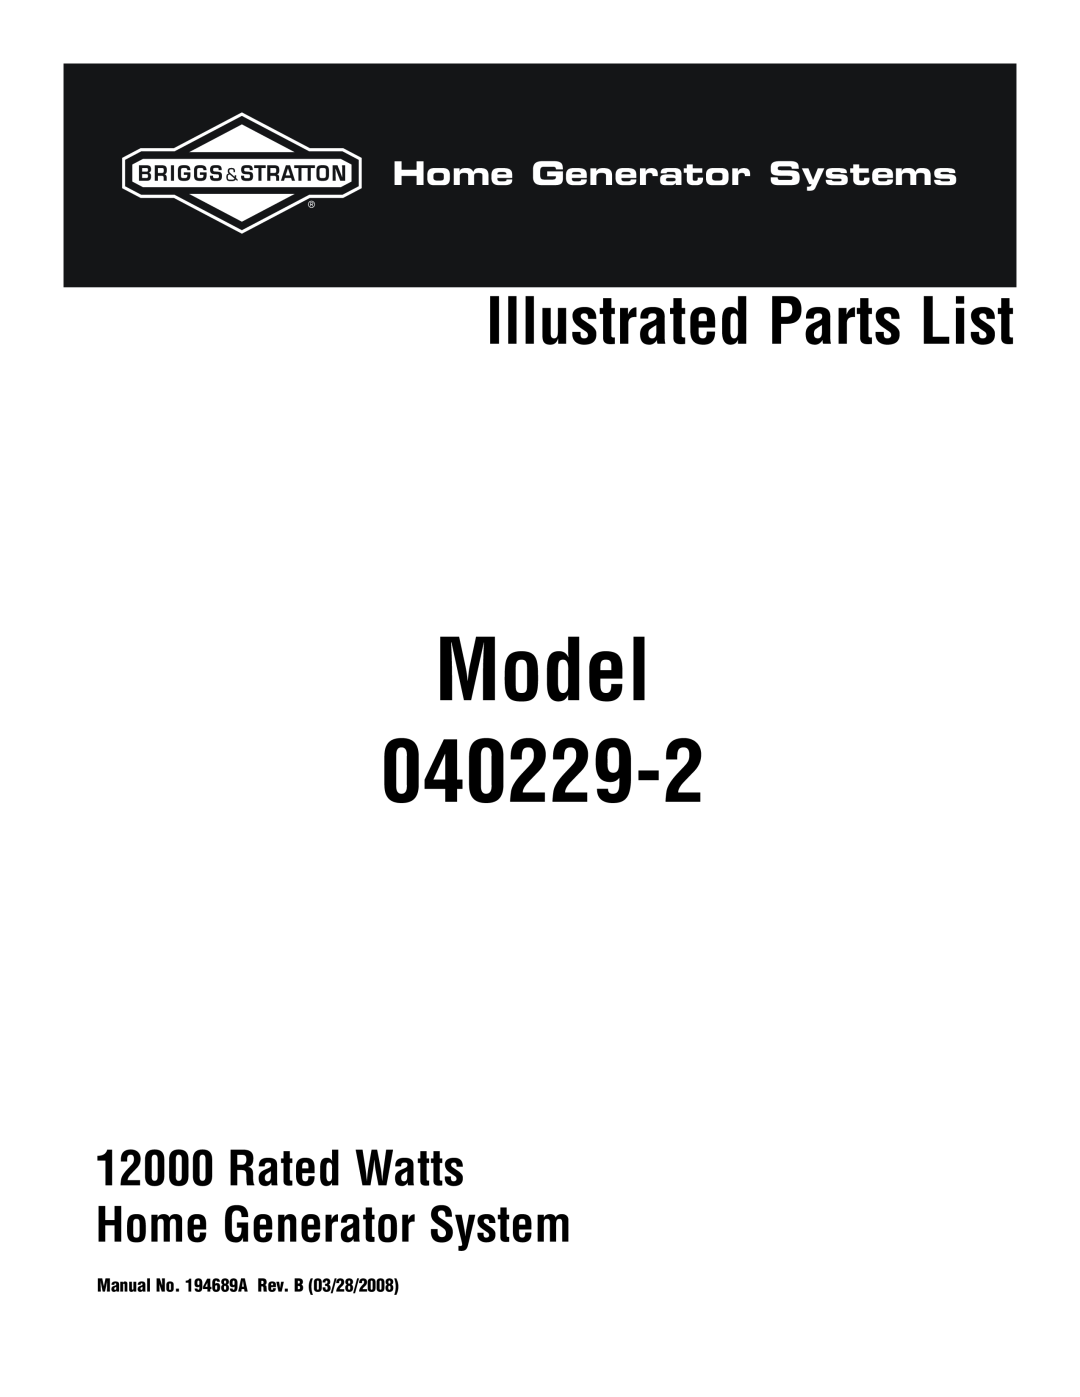 Briggs & Stratton manual Model 040229-2, Illustrated Parts List, Rated Watts Home Generator System 